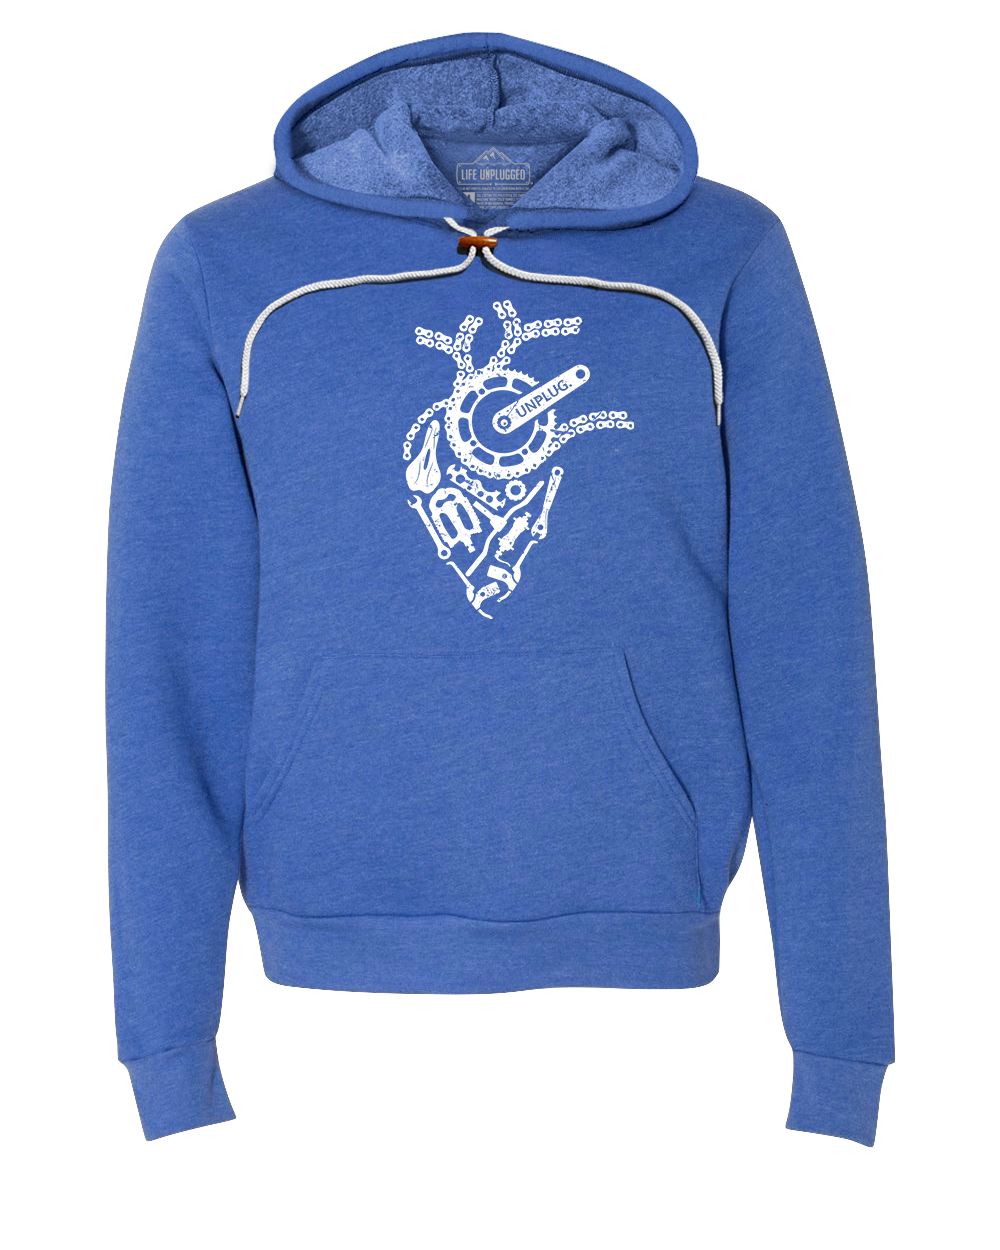 Anatomical Heart (Bicycle Parts) Premium Super Soft Hooded Sweatshirt - Life Unplugged